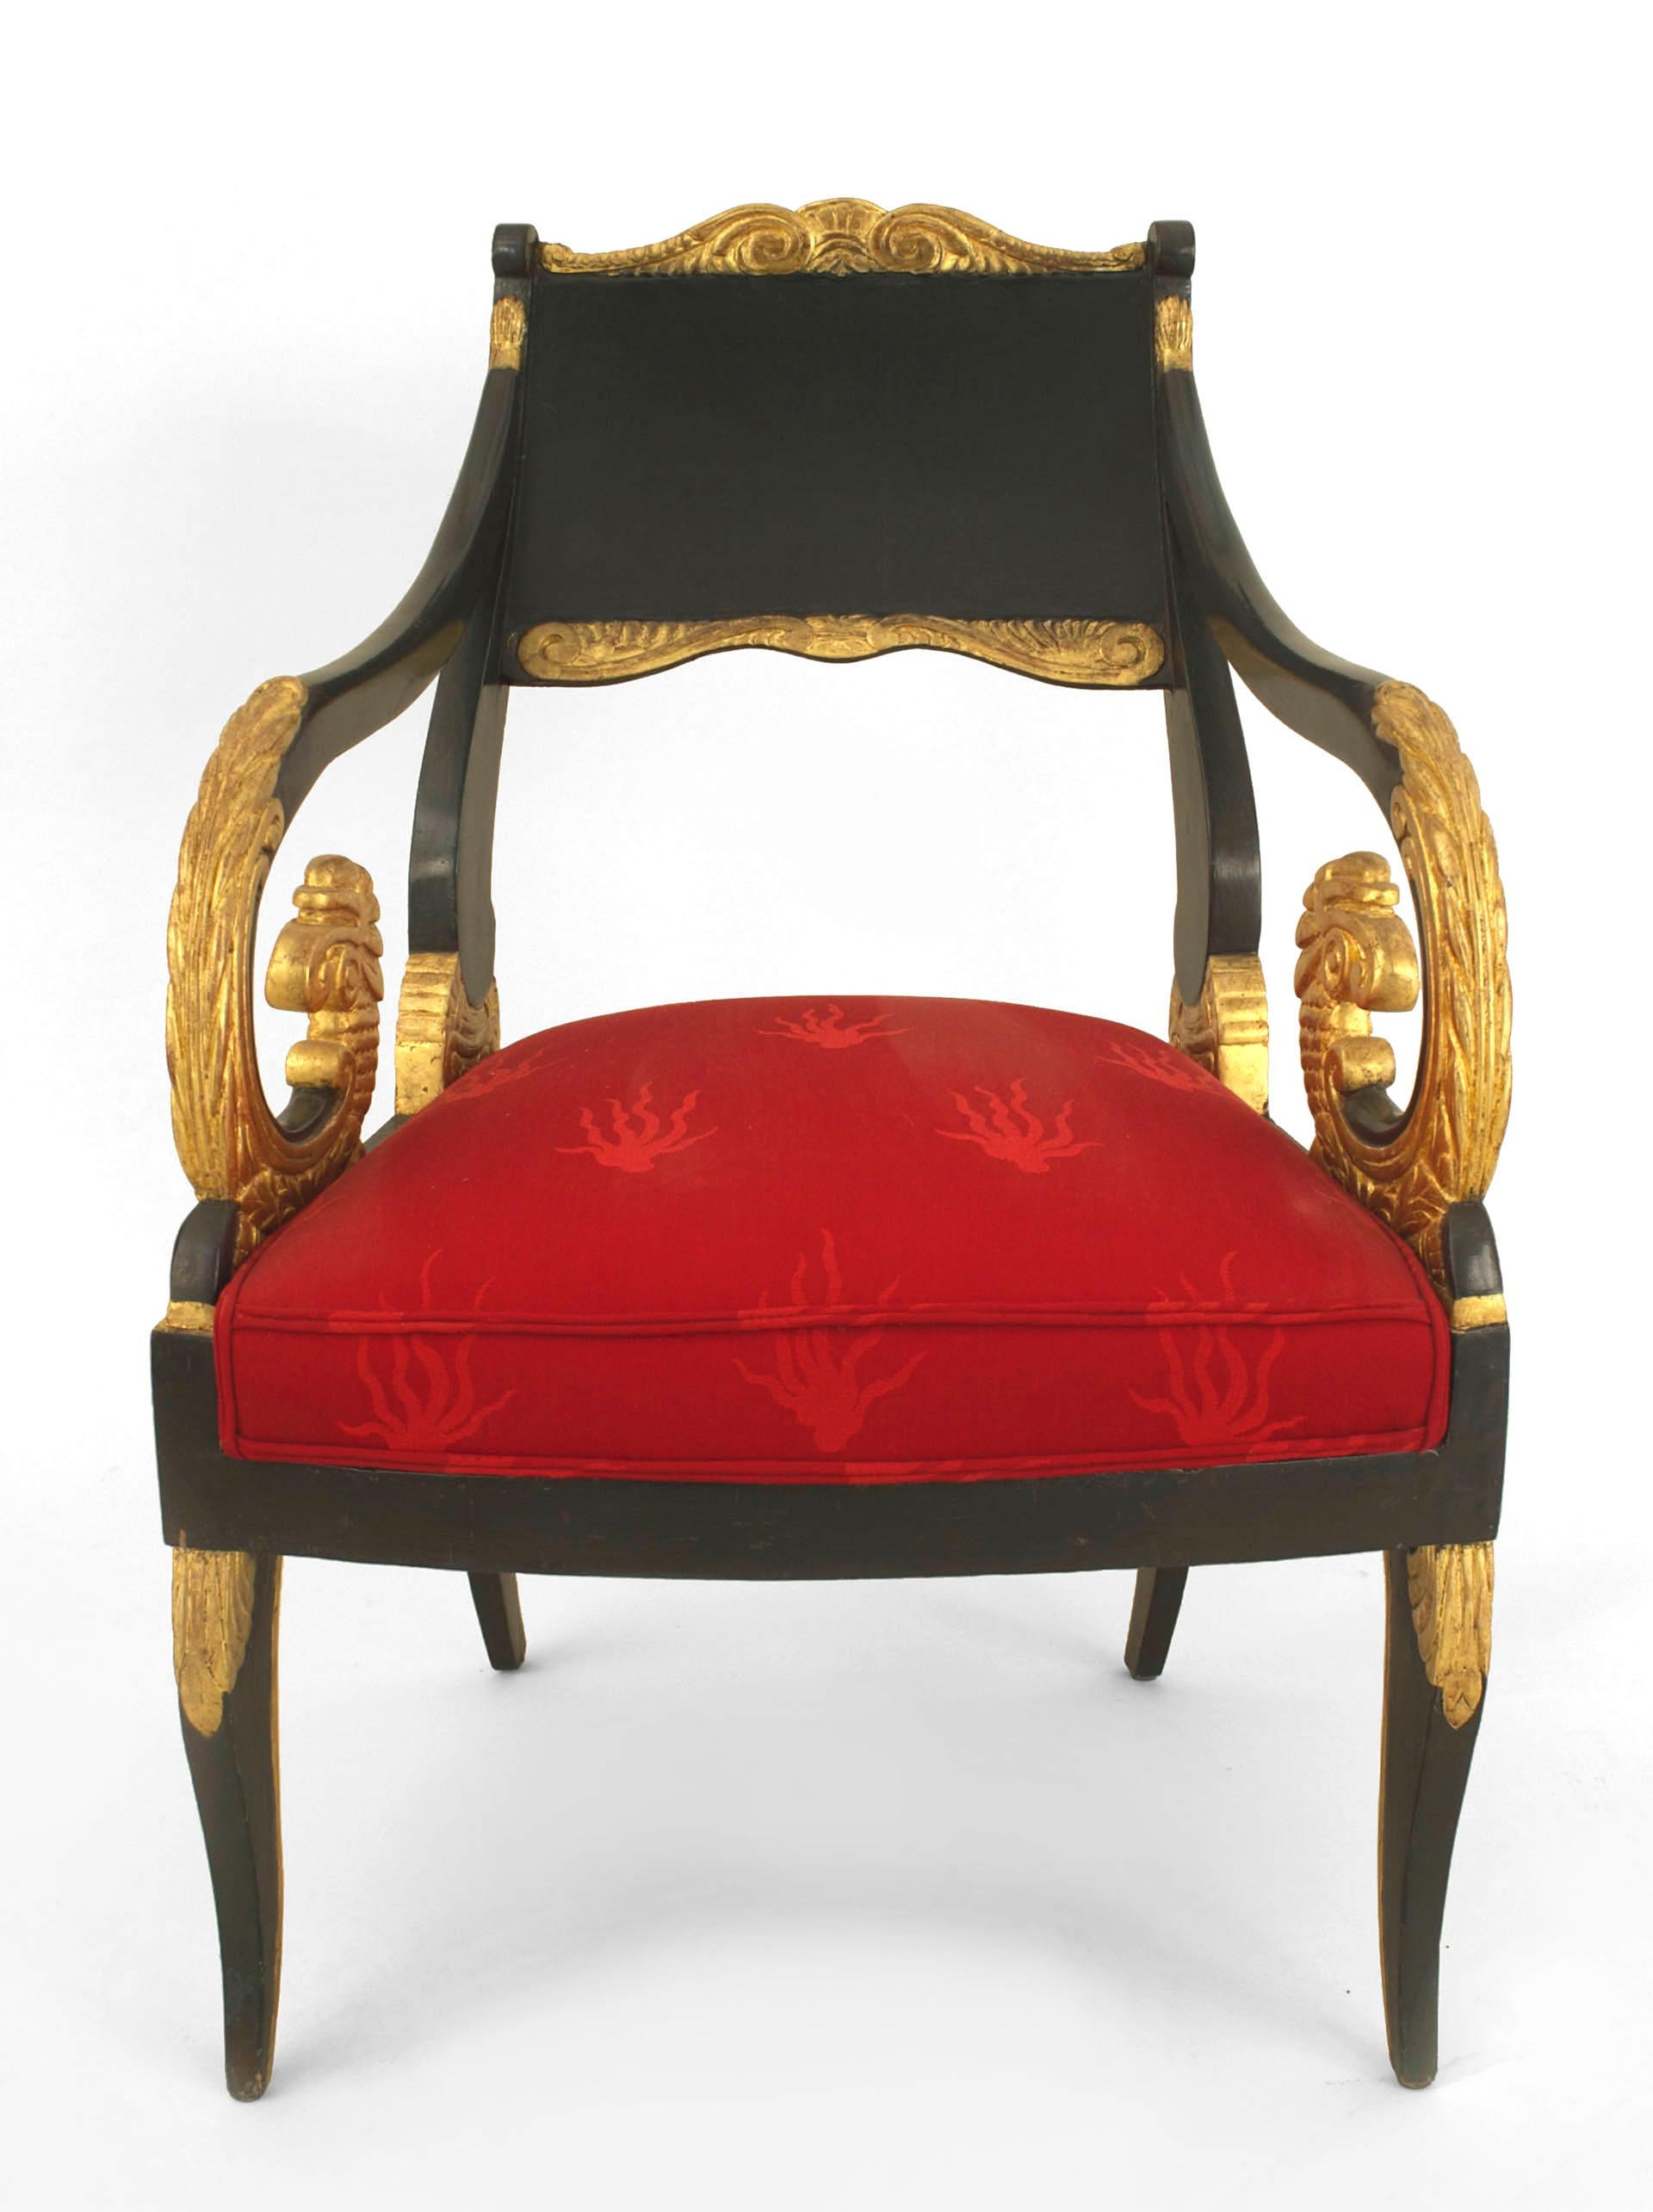 Pair of Russian Neoclassic (early 19th Century) parcel gilt and dark green painted armchairs with scrolled arms and red damask silk upholstered seats. (PRICED AS Pair) (Similar to: 018681A)
